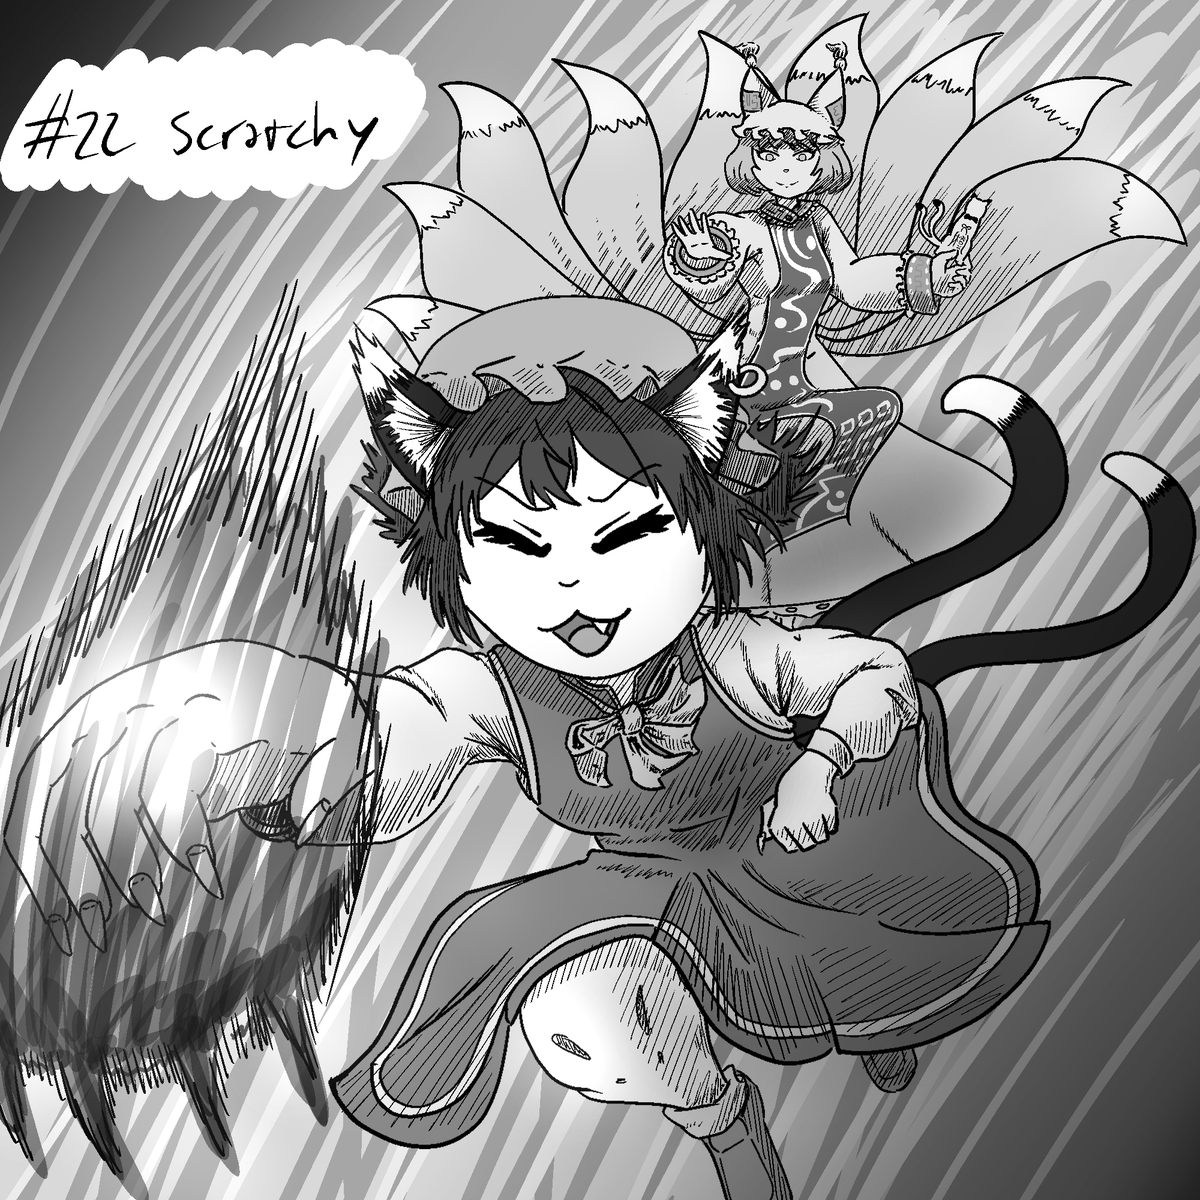 Inktober day 22: Scratchy. 
Chen! I choose you!
#inktober2023day22 #inktober2023 #inktober #Chen #YakumoRan #Ran #touhou #東方Project #橙 #ちぇん #八雲藍 #藍 #らん #らんしゃま